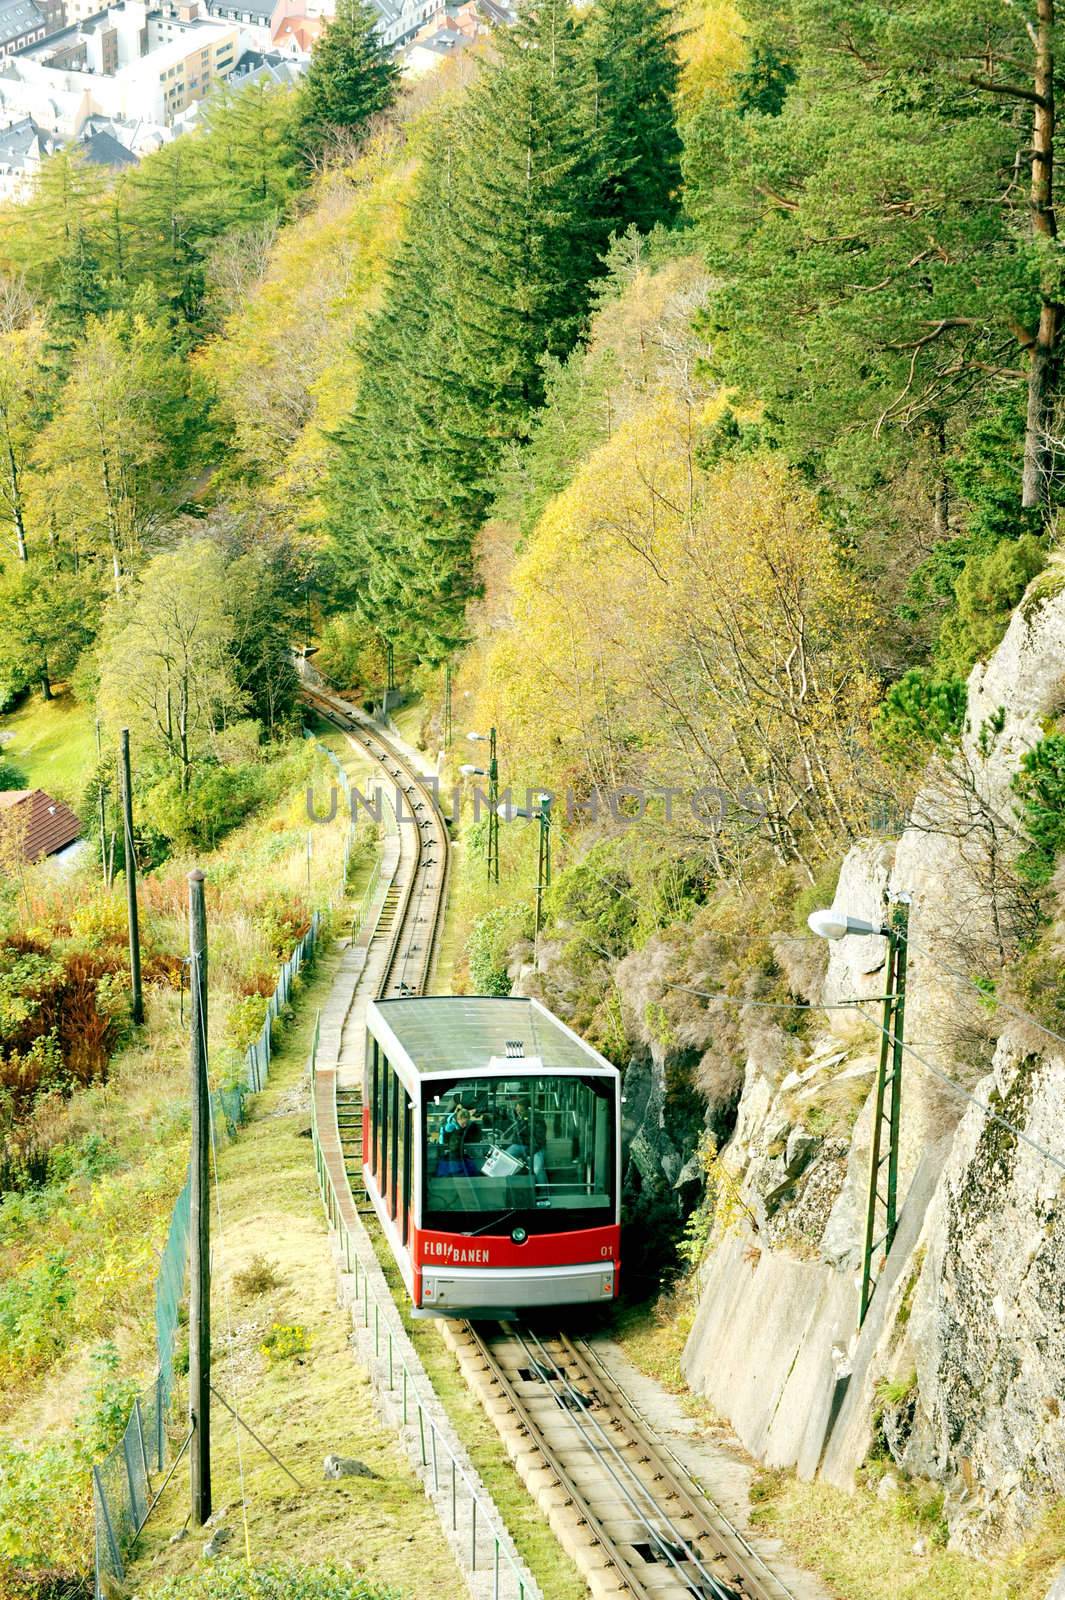 Cable car in Bergen, Norway, taken on October 2010 